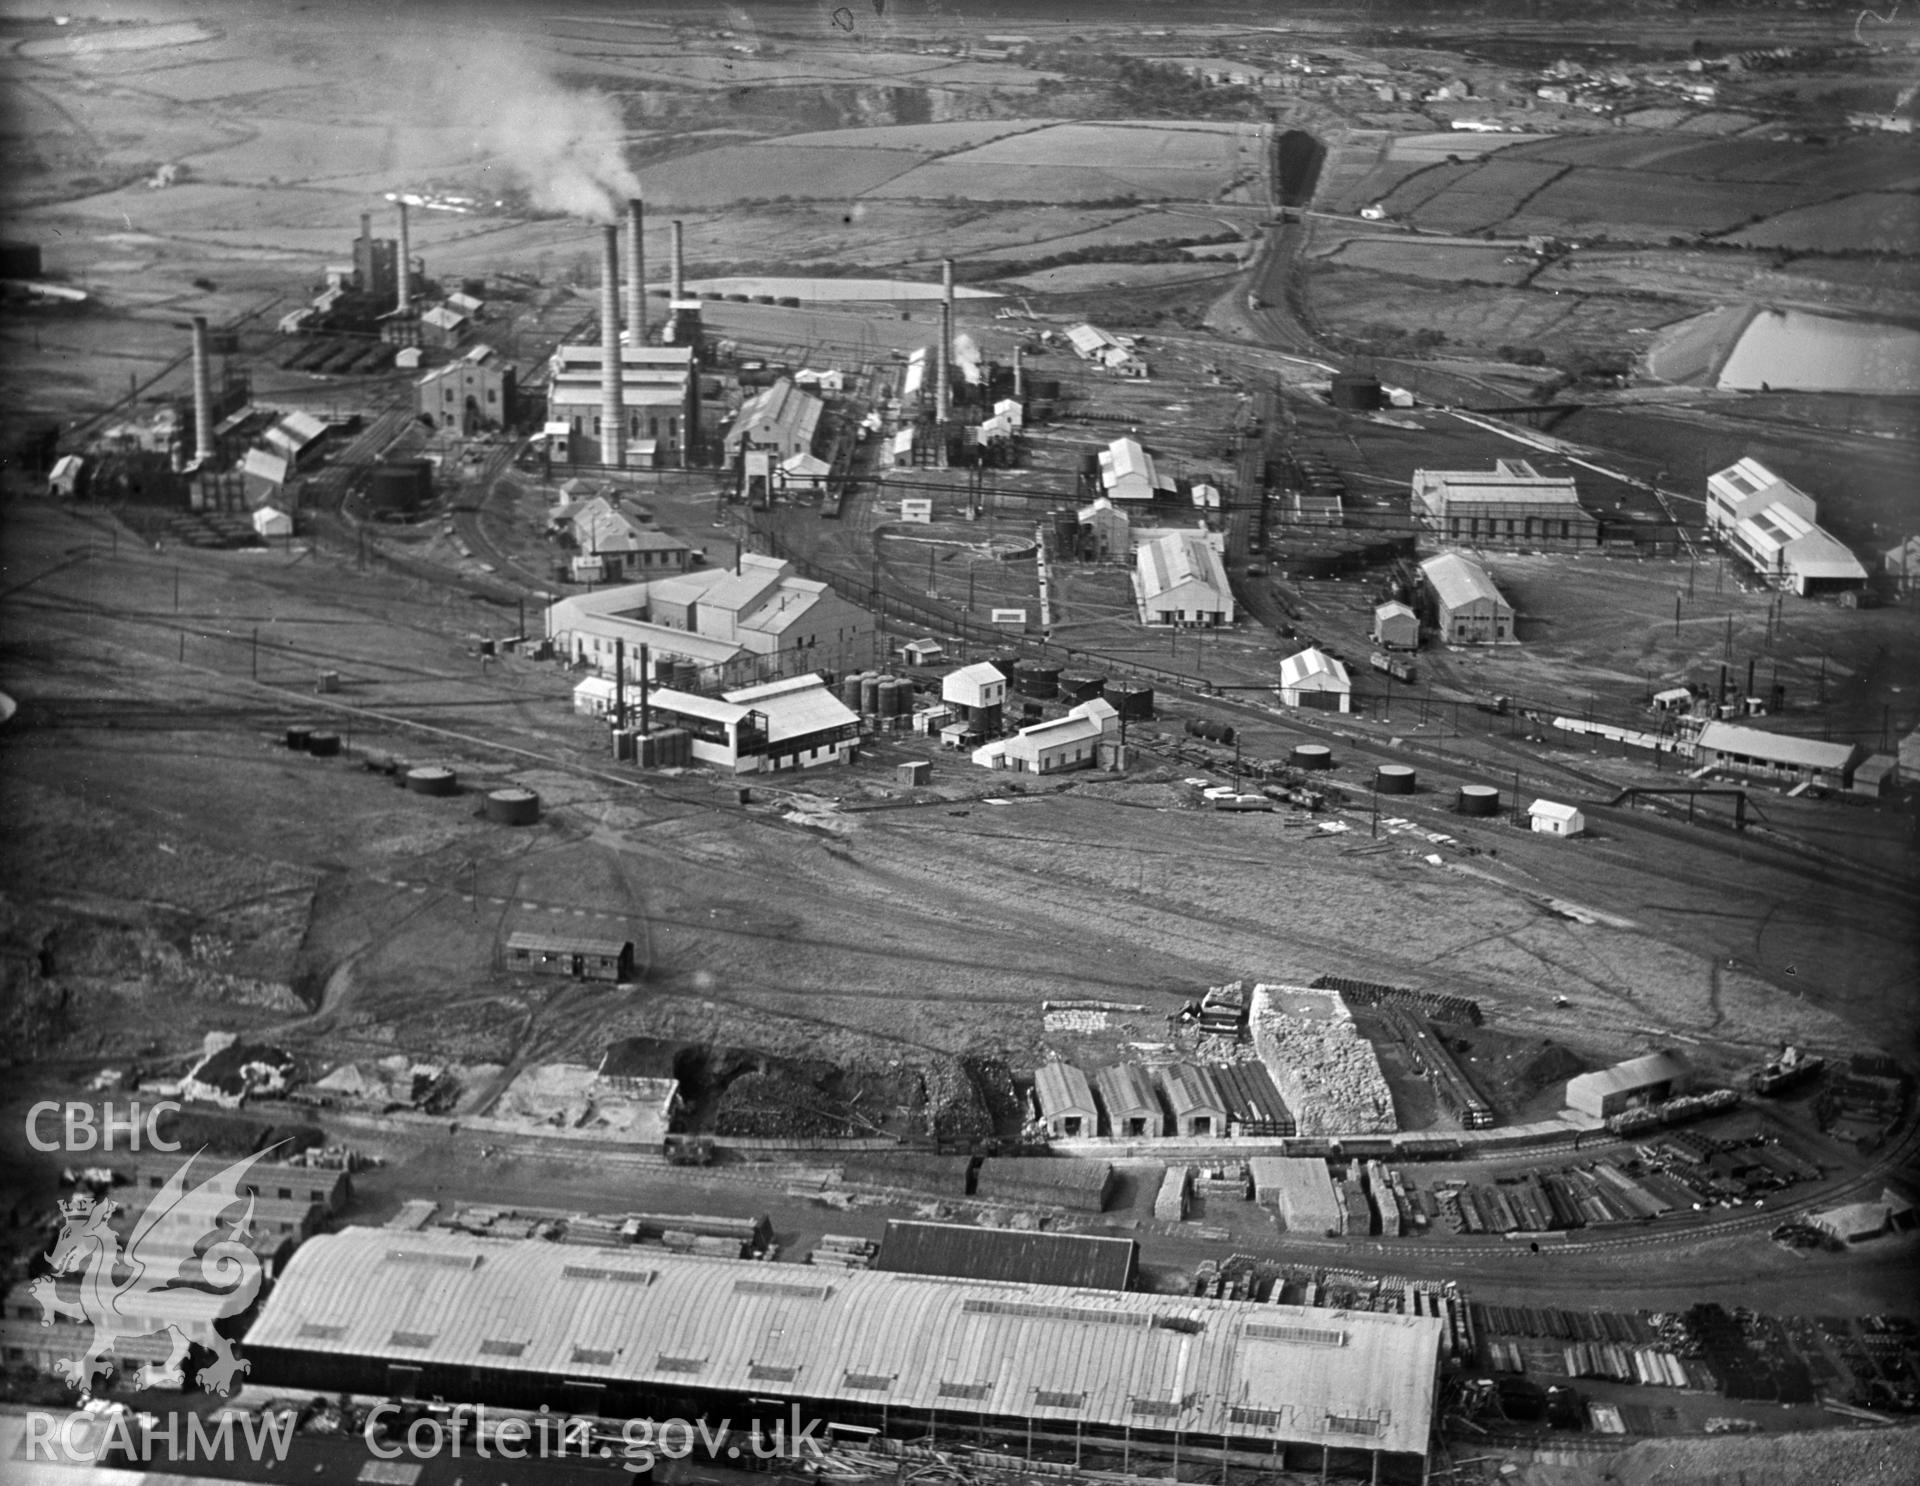 View of Swansea Anglo Persian Oil Co. (Llandarcy Oil Refinery), oblique aerial view. 5?x4? black and white glass plate negative.